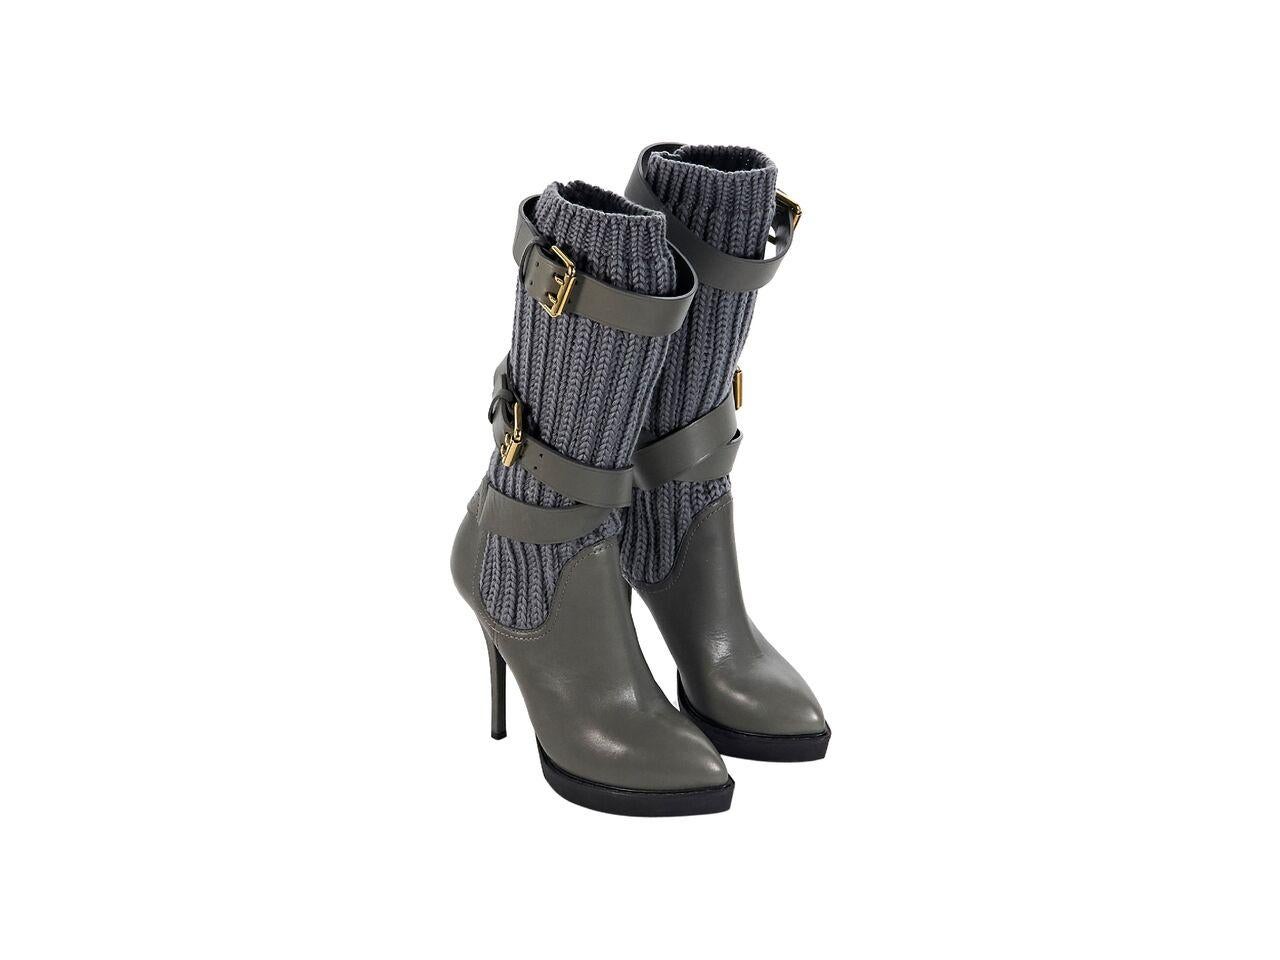 Product details:  Grey leather platform boots by Gucci.  Buckle straps accent knit shaft.  Pull-on style.  Goldtone hardware.  5